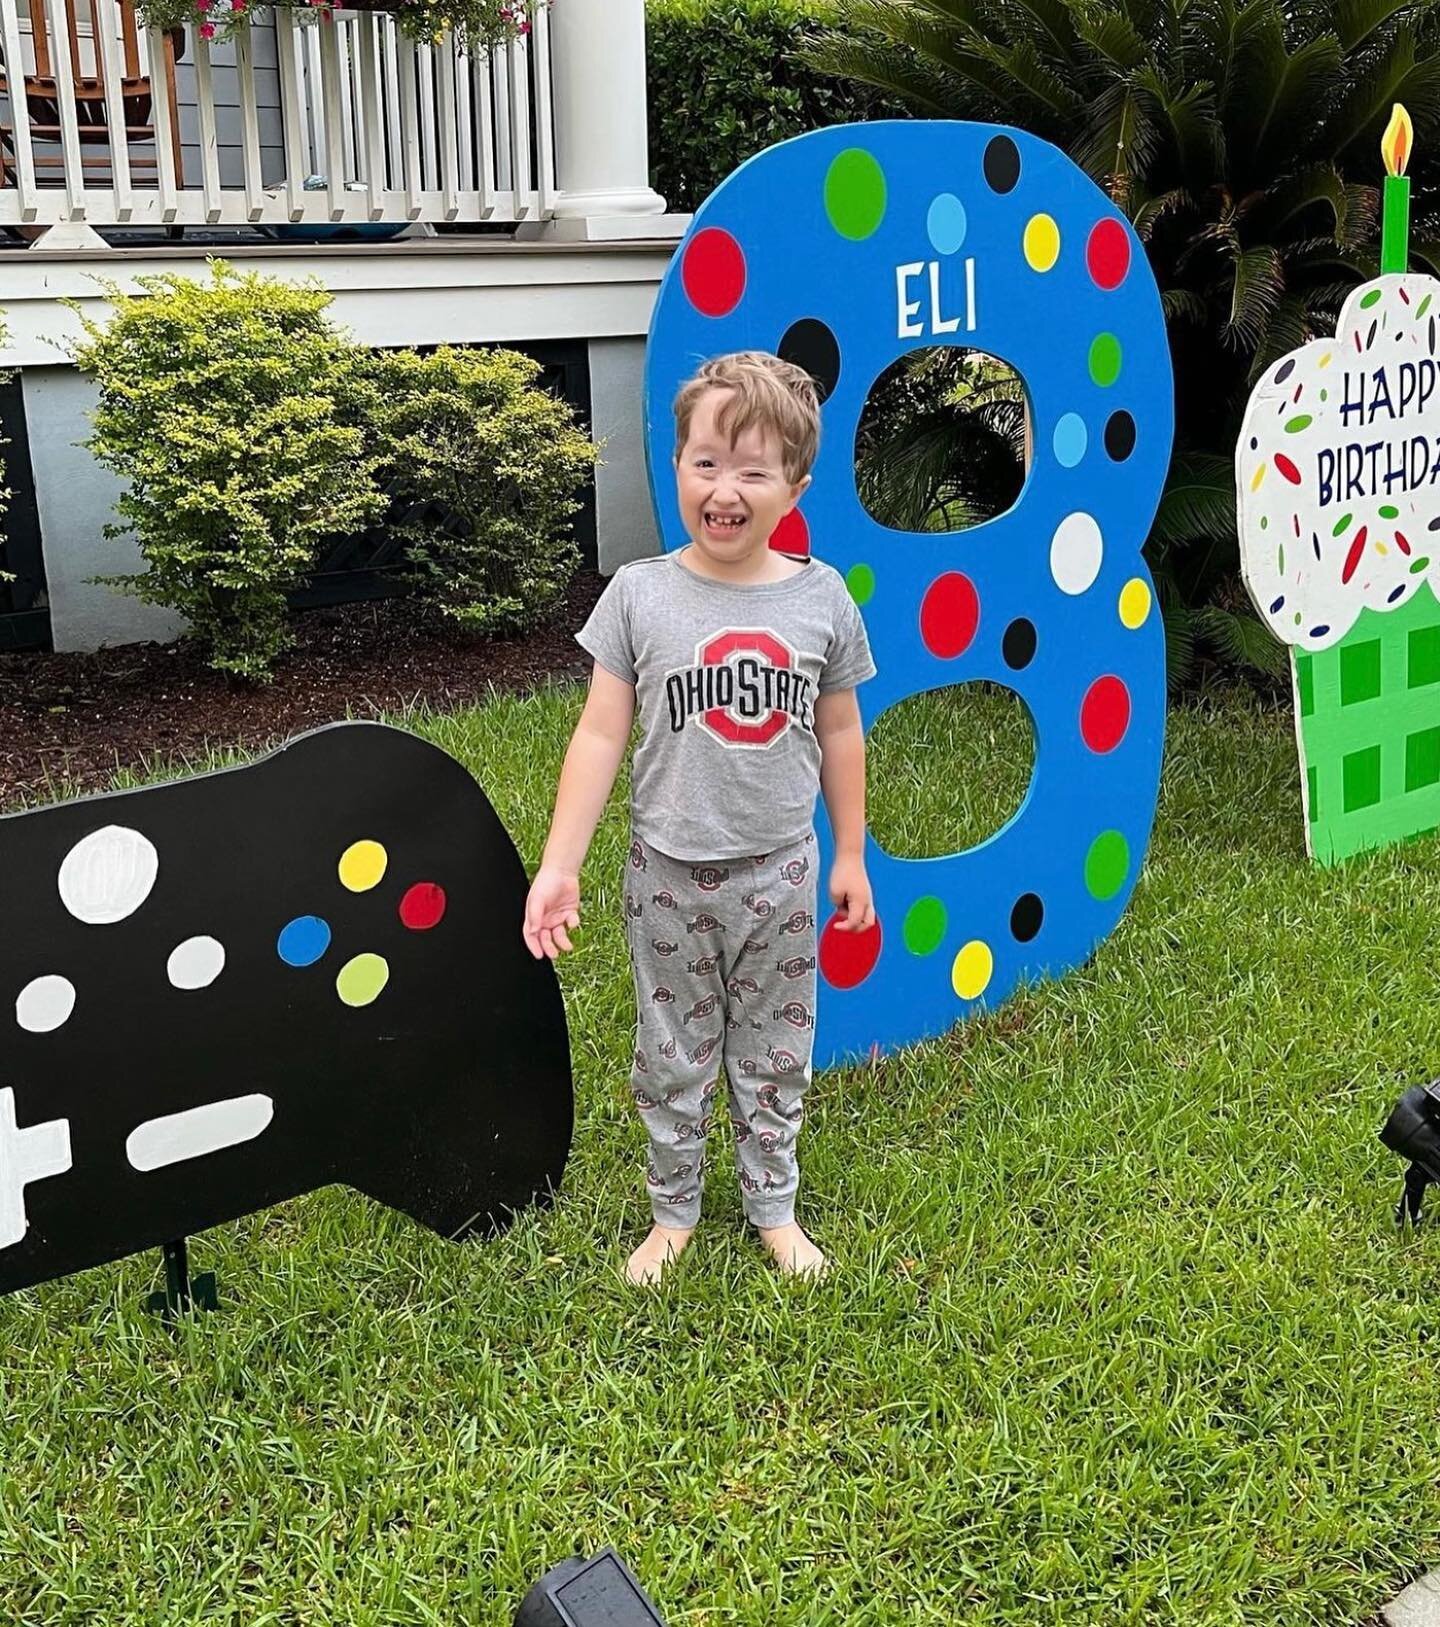 It&rsquo;s great to be  8. We have loved being apart of Eli&rsquo;s birthday tradition.  #6thbirthday #7thbirthday #8thbirthday 

To order click the link in our bio or text 843-345-3501

#sassysignschs #charlestonyardsigns #danielisland #8thbirthday 